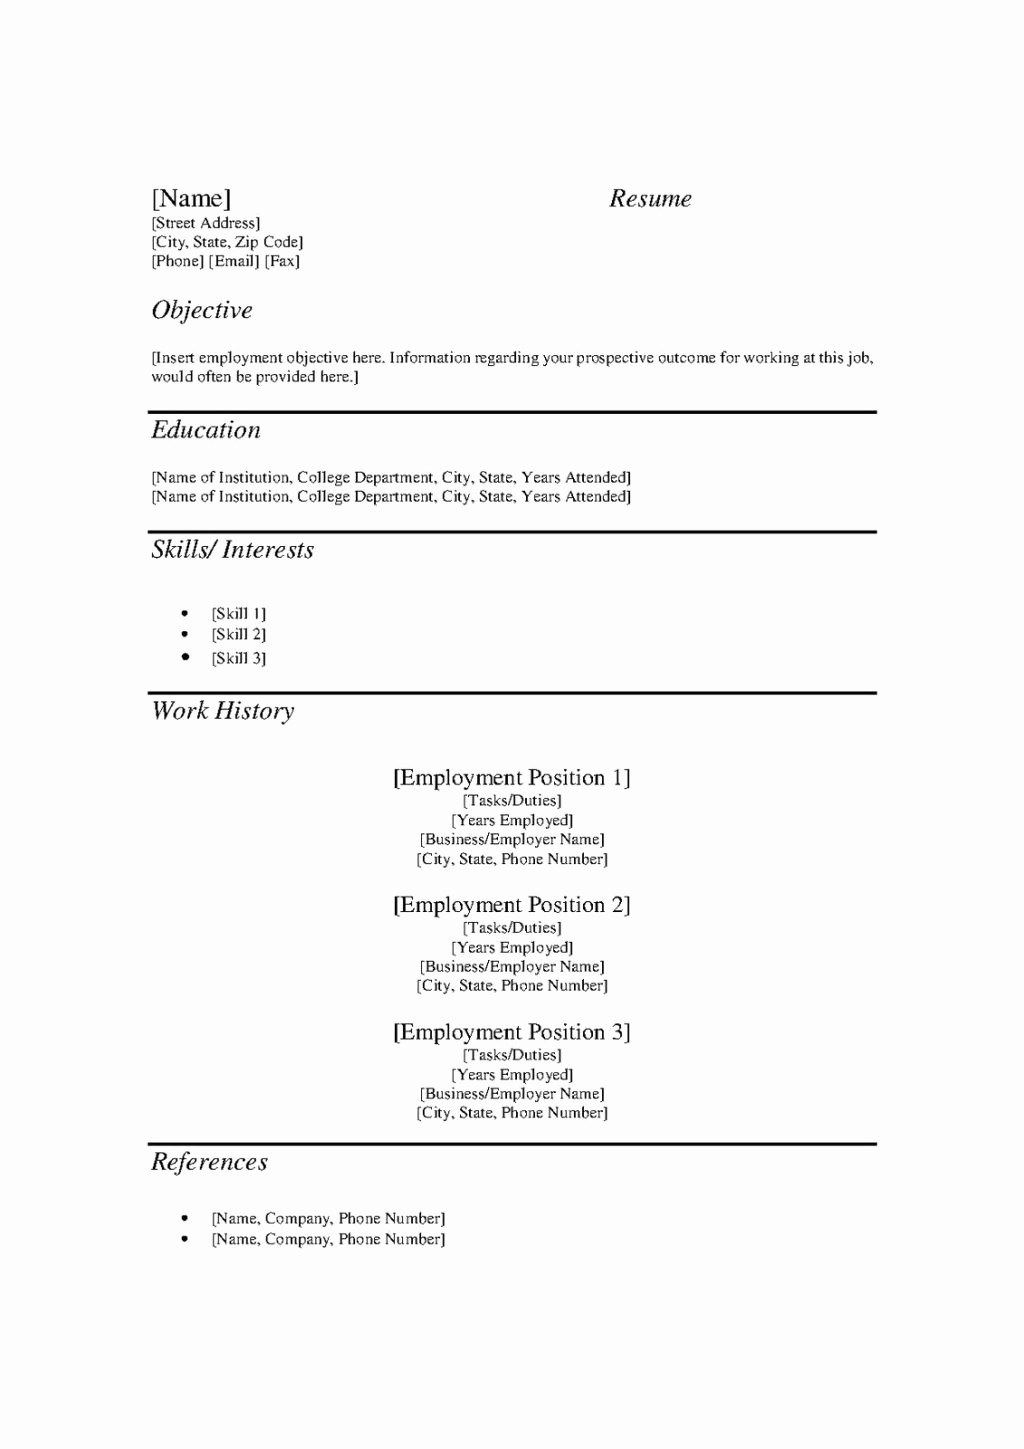 Microsoft Resume Templates Free Download Inspirational Fill In the Blank Resume Templates for Microsoft Word Free